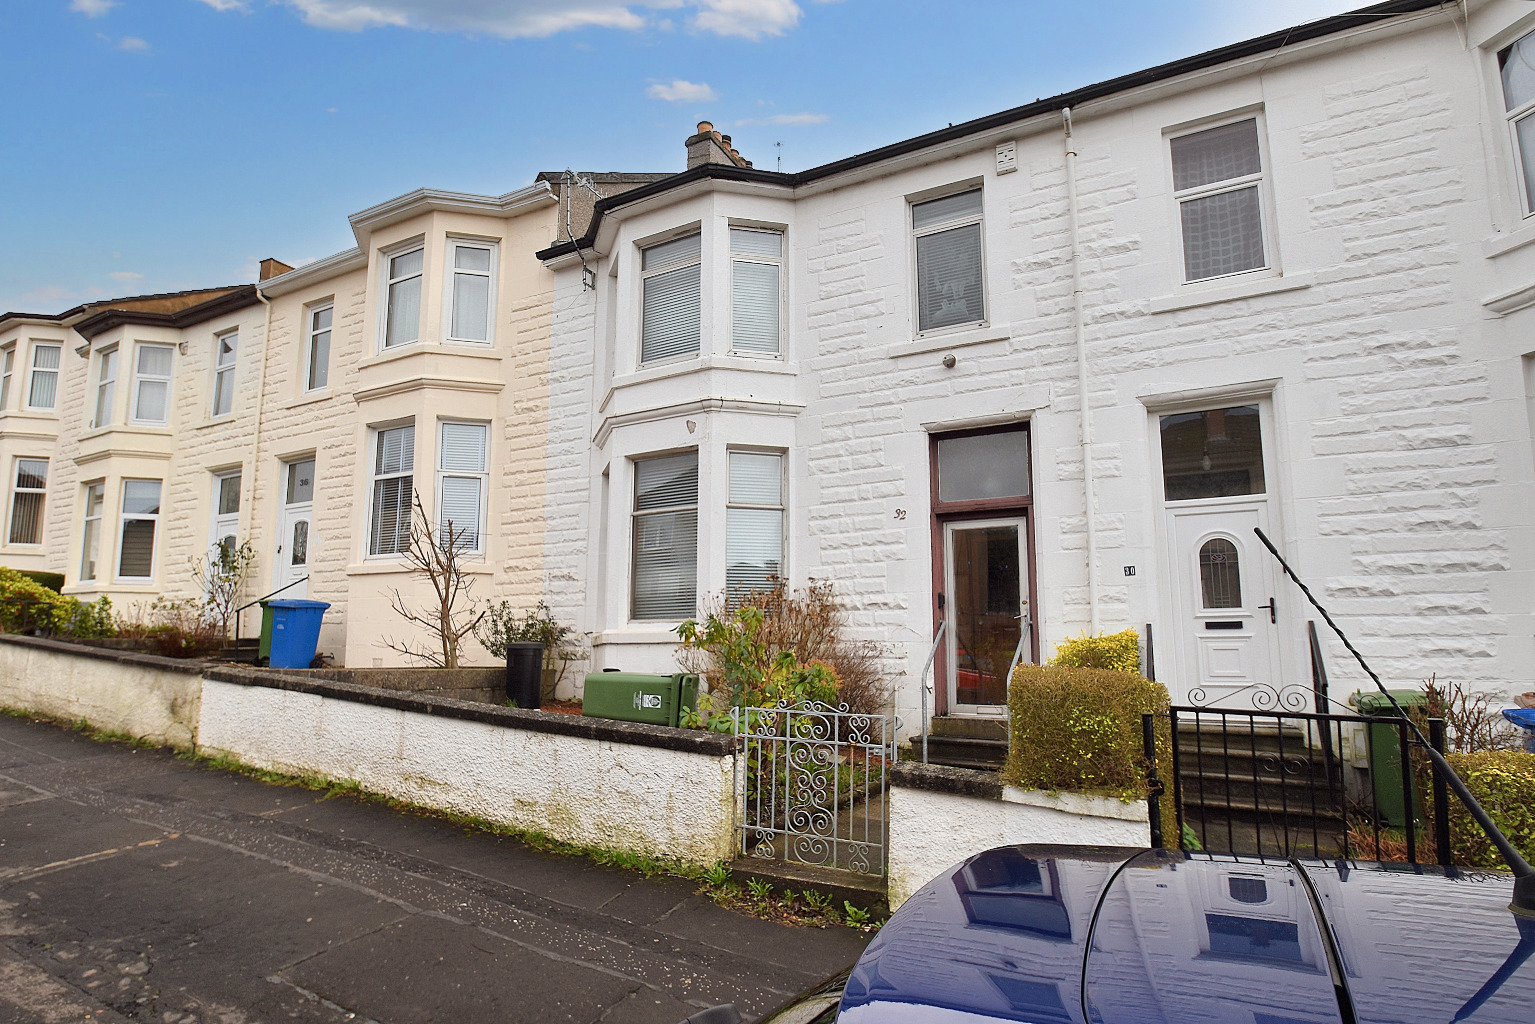 3 bed terraced house for sale in Blairgowrie Road, Glasgow - Property Image 1